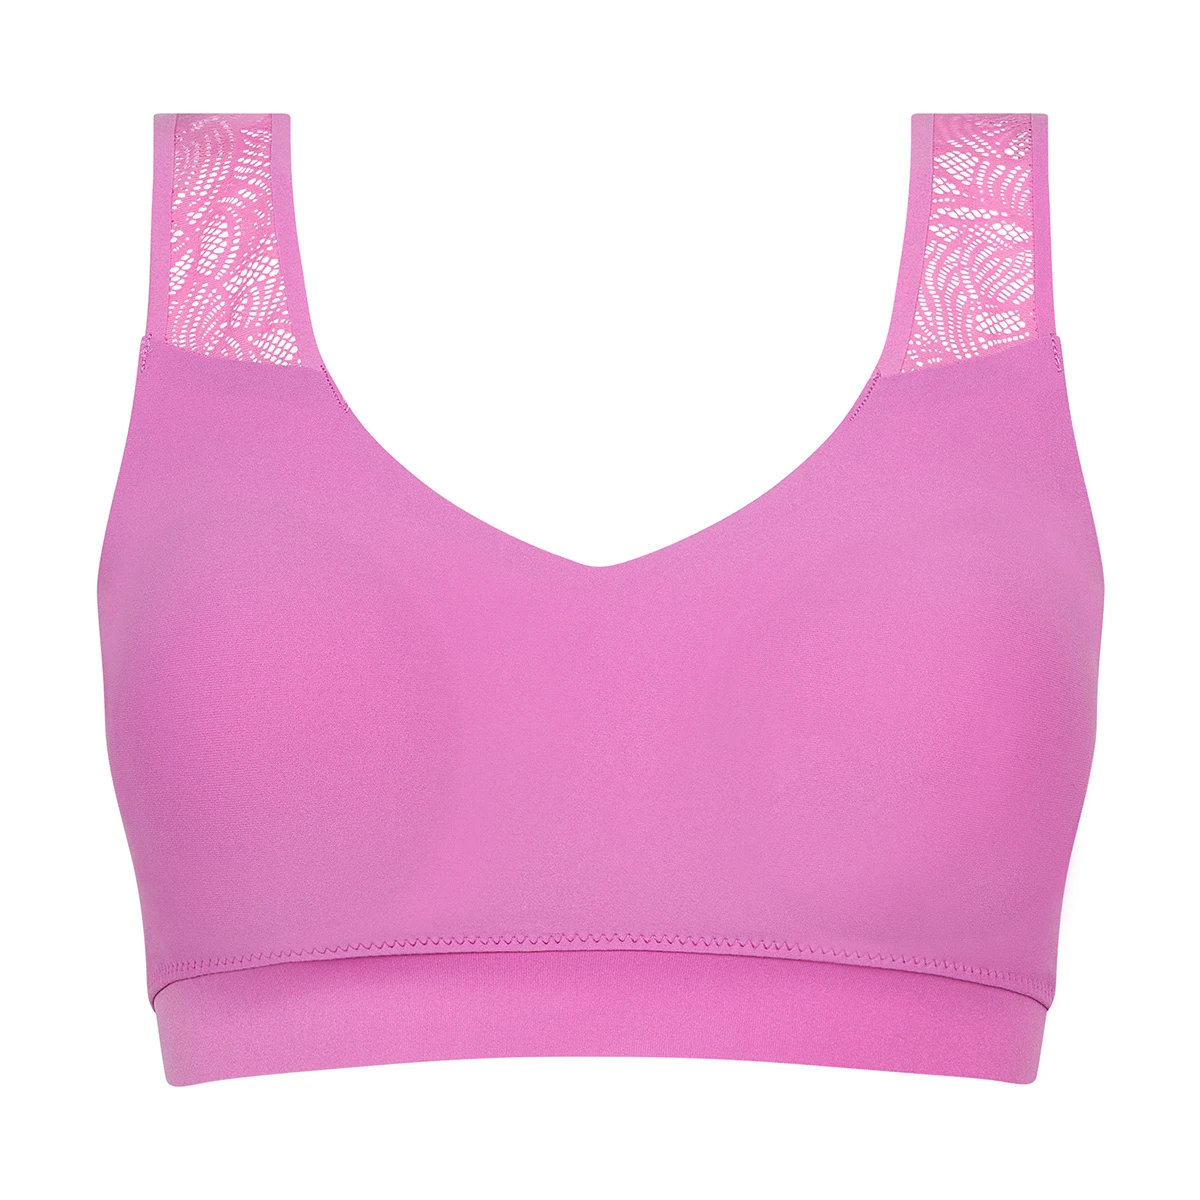 ᐅ Bra tops • 365-day right of return ⇒ Save up to 30%